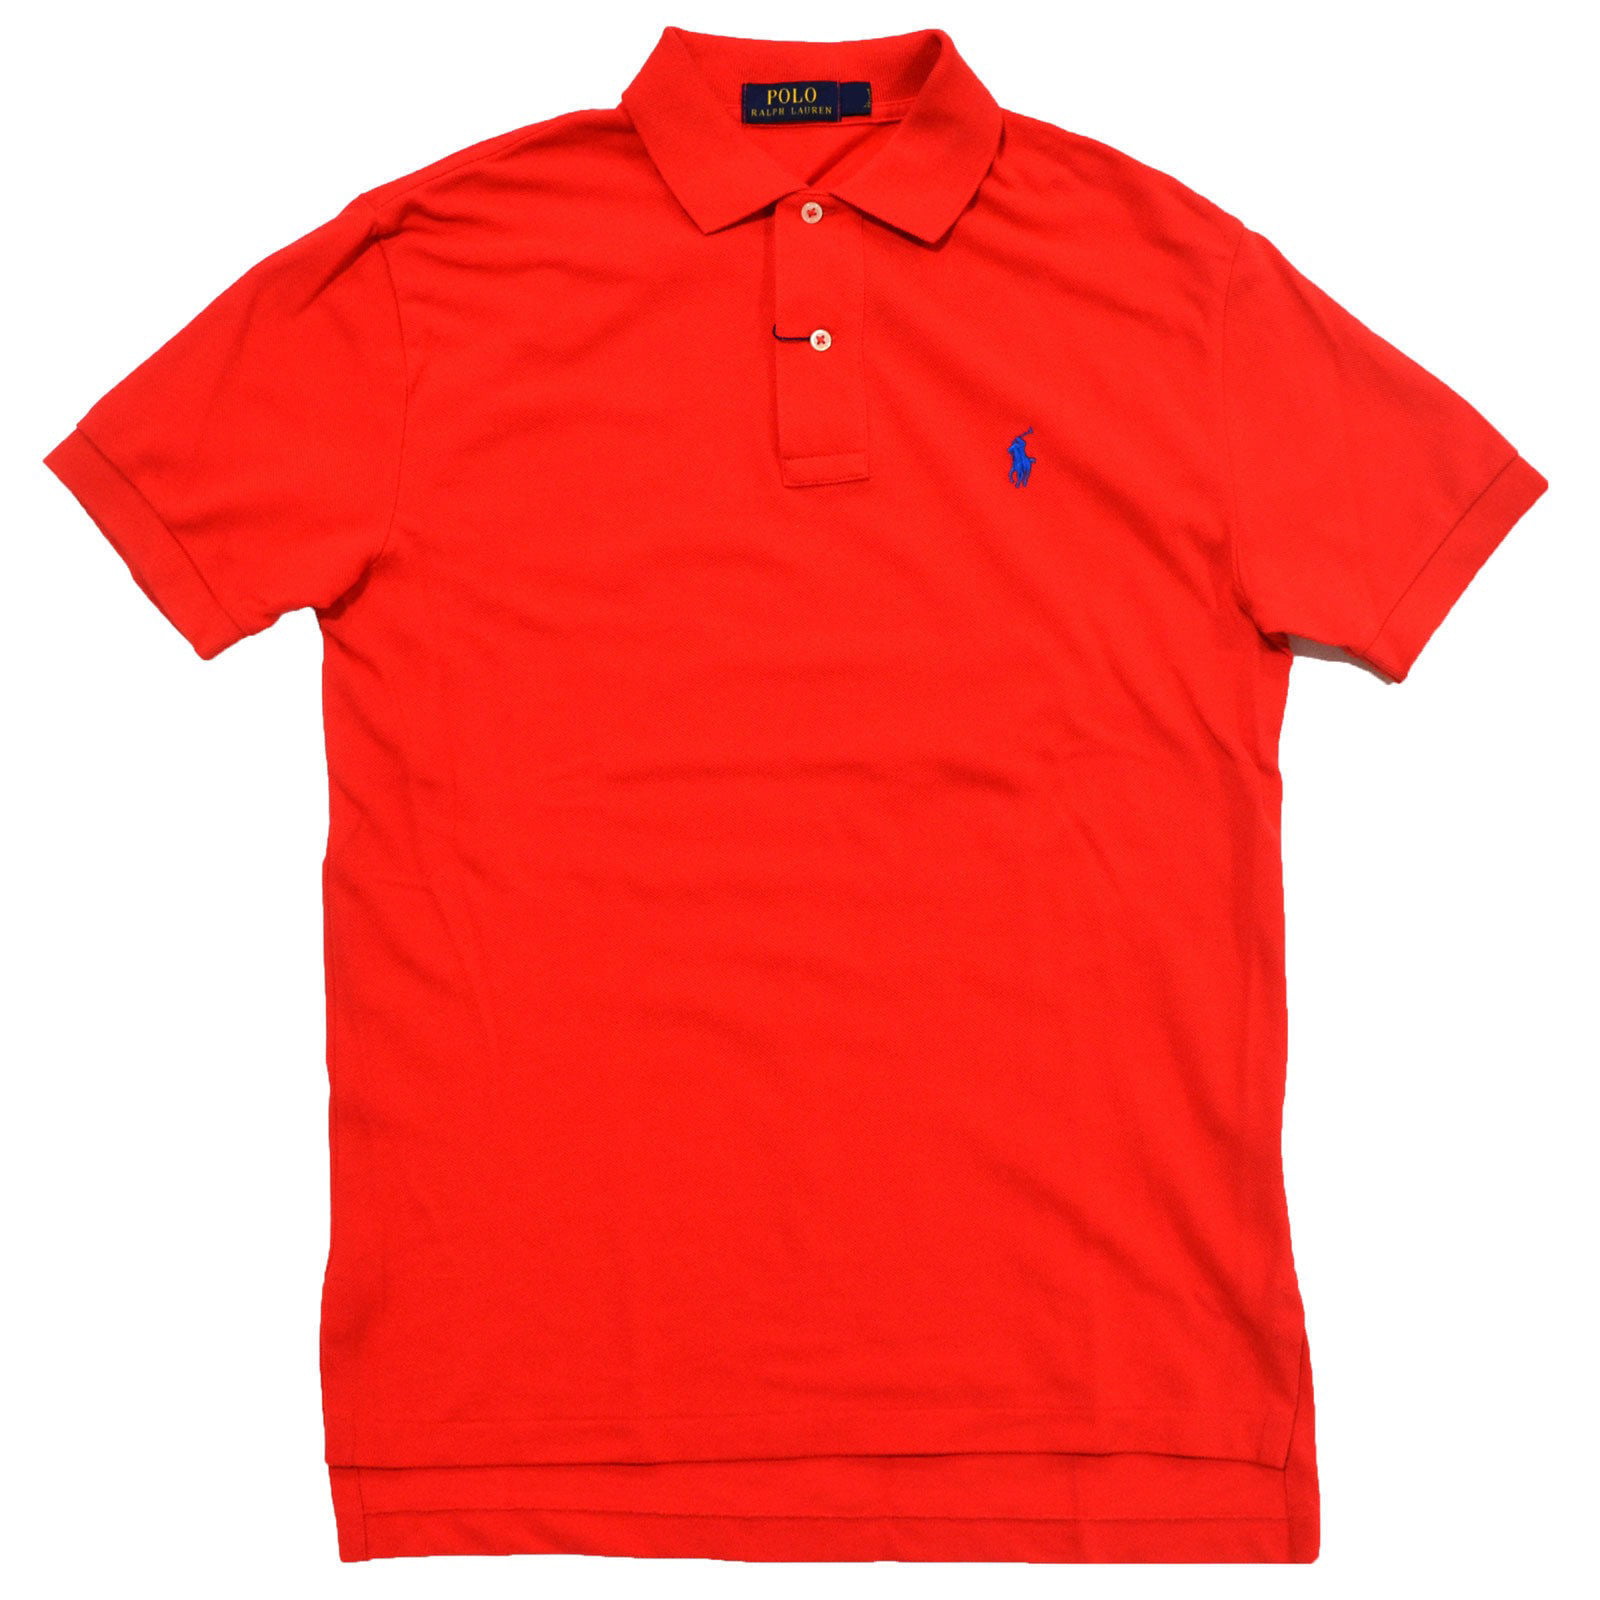 Polo Ralph Lauren NEW Bright Red Mens Size Small S Pique Polo Shirt ...